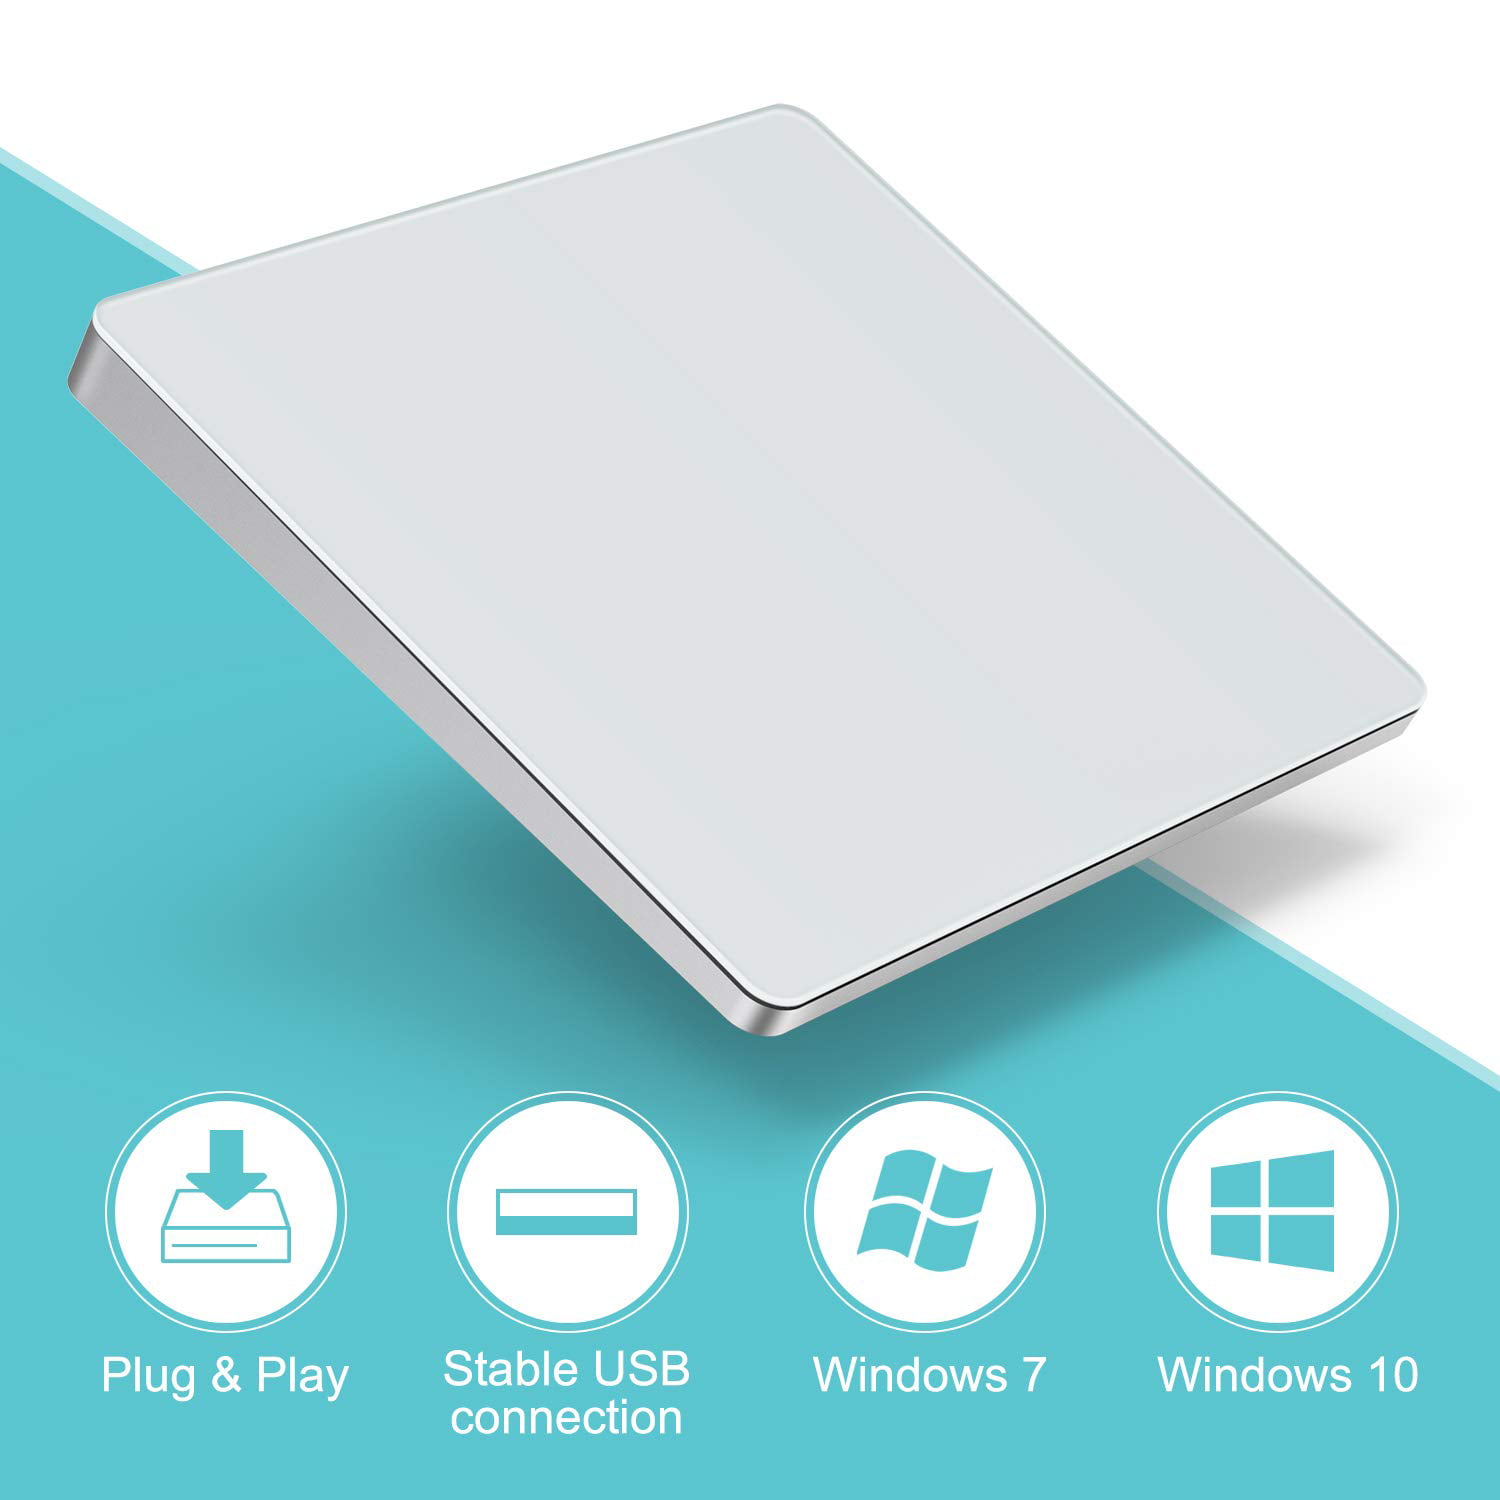 PC Notebook Jelly Comb Multi-Touch Wired Trackpad for Windows 7 and Windows 10 Computer USB Touchpad Laptop